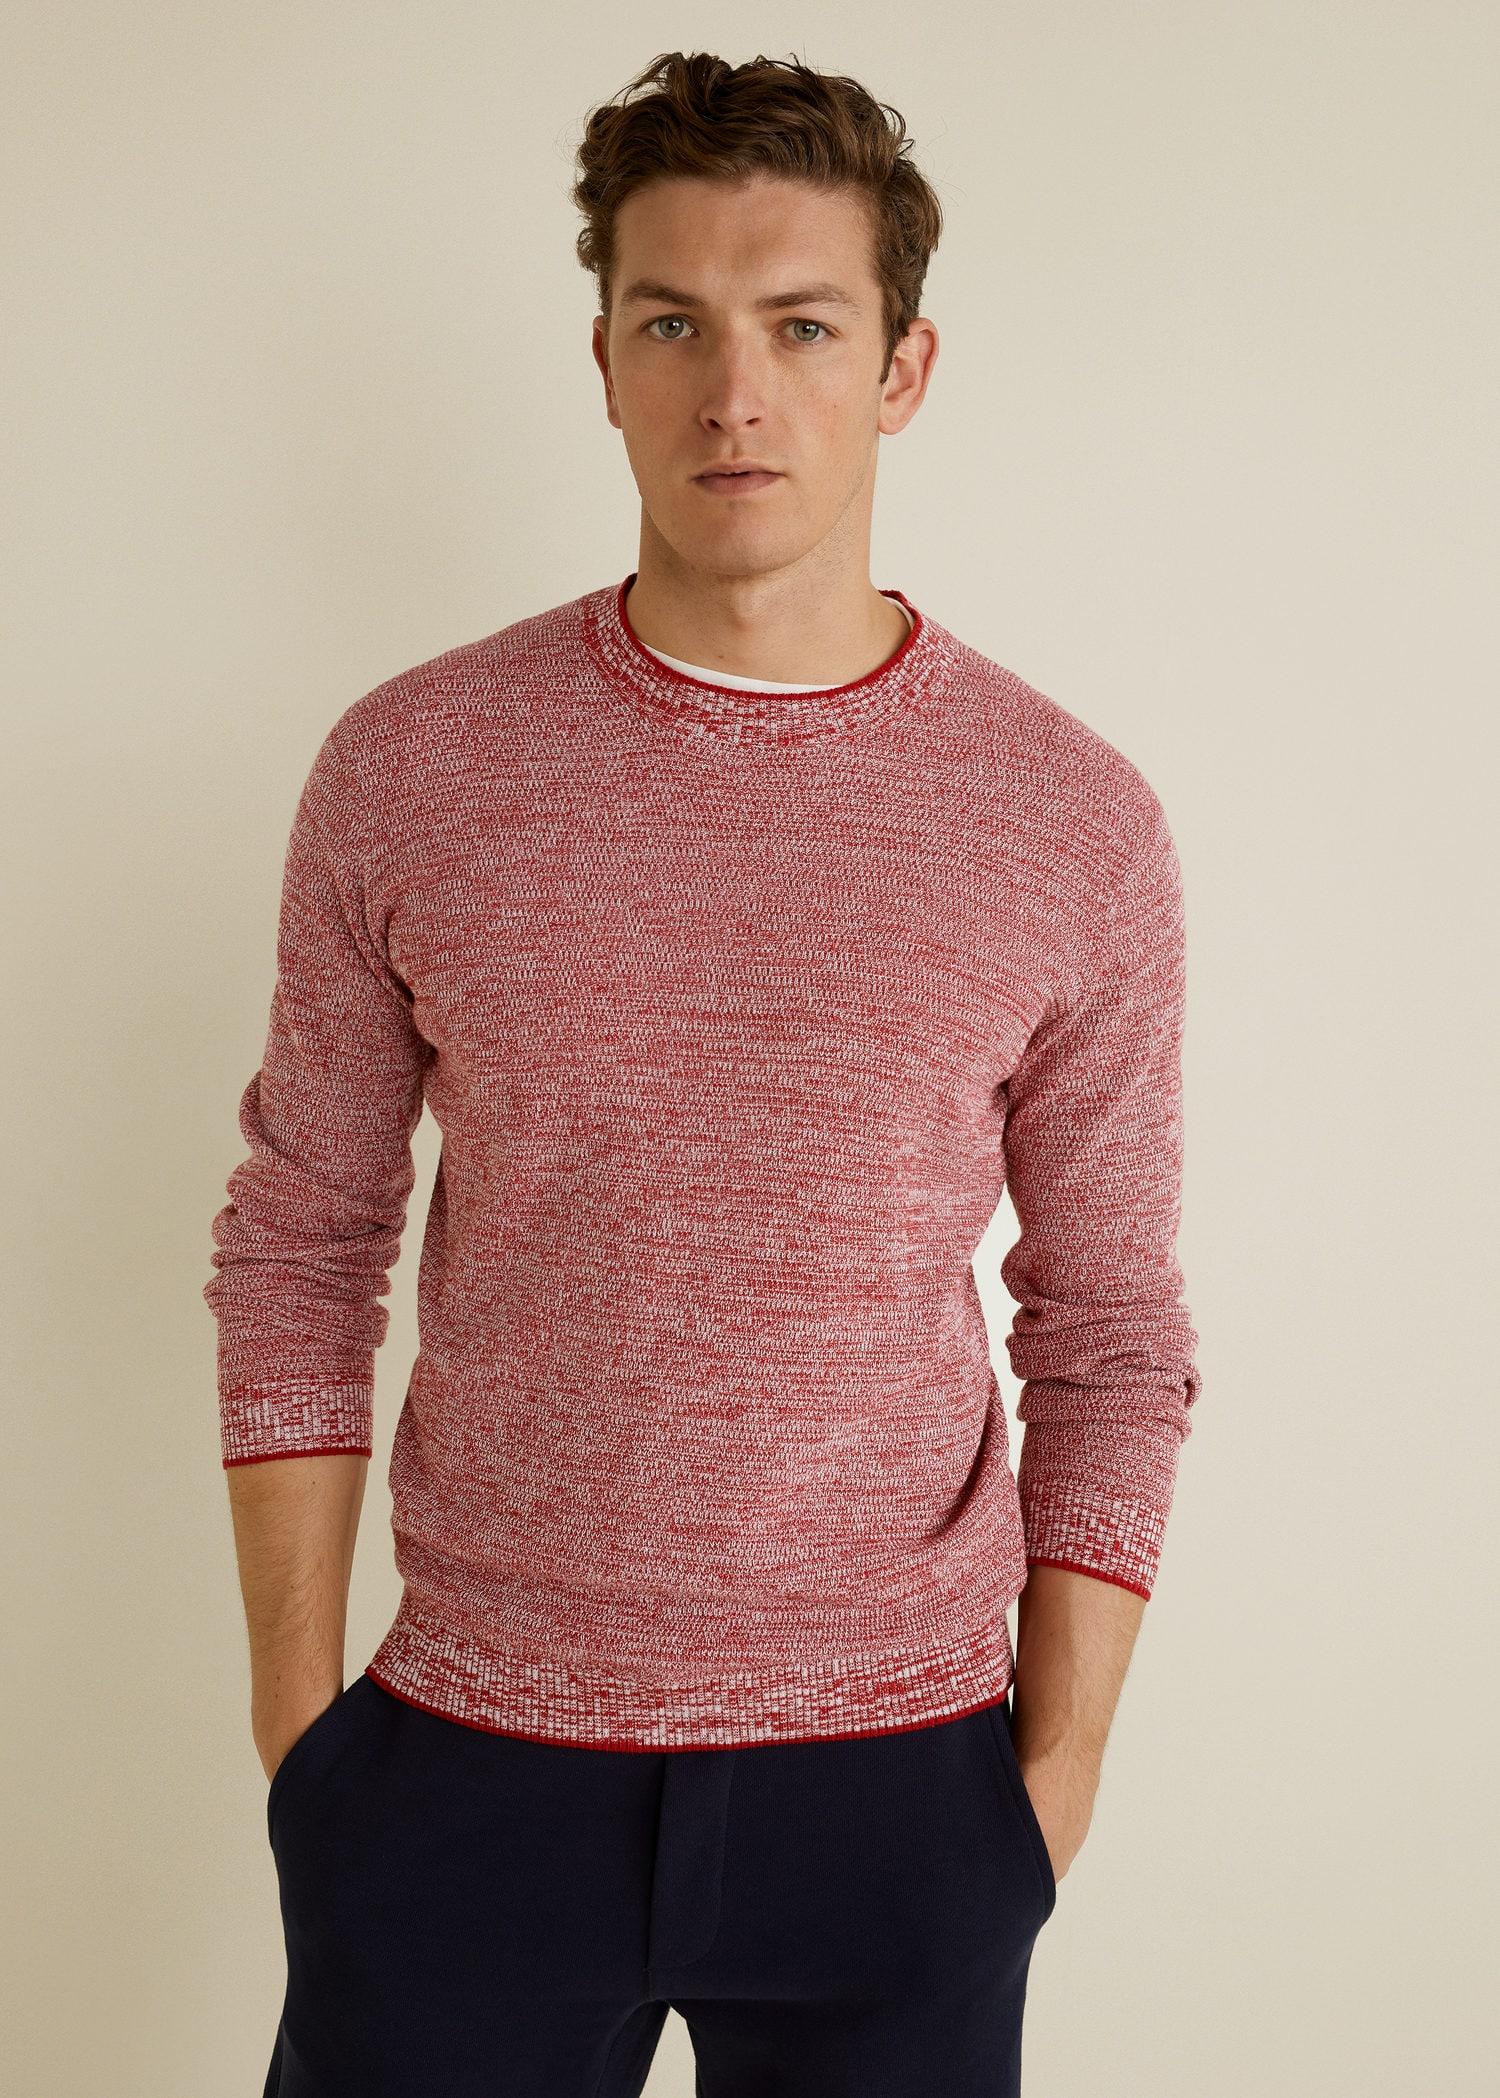 Mango Flecked Structure Cotton Sweater in Red for Men - Lyst